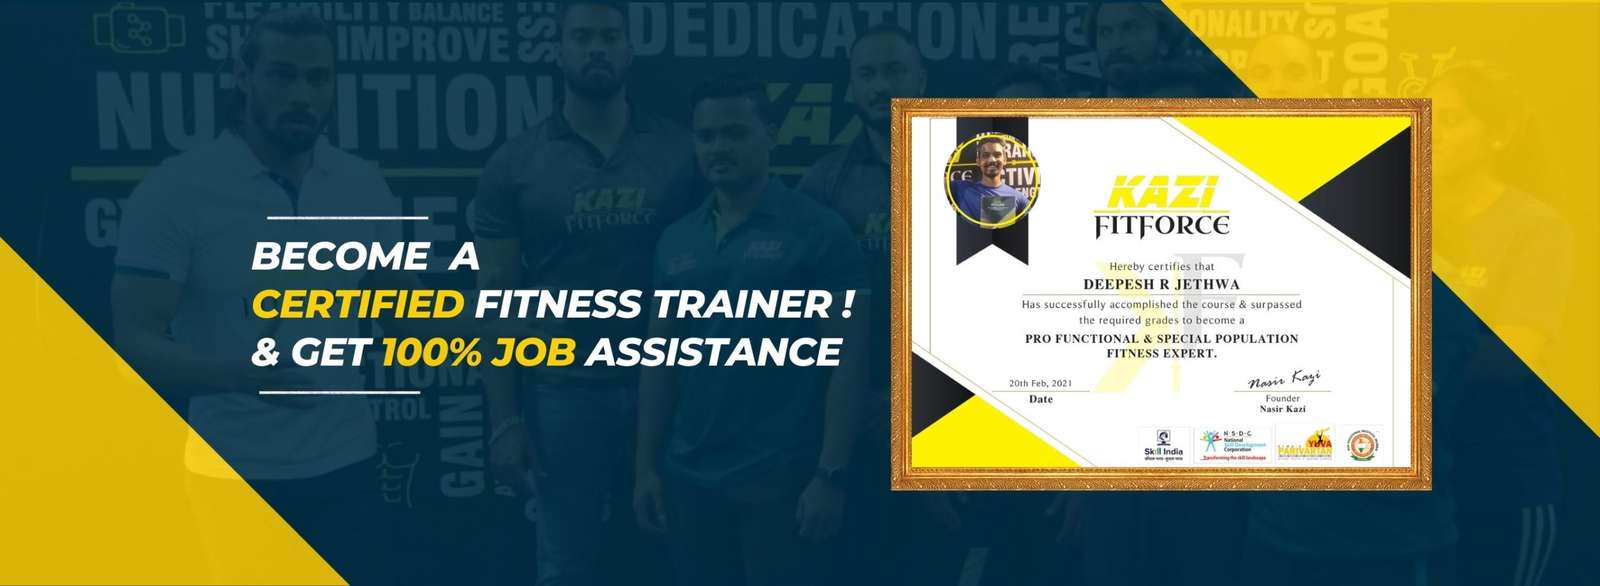 personal trainers certifications